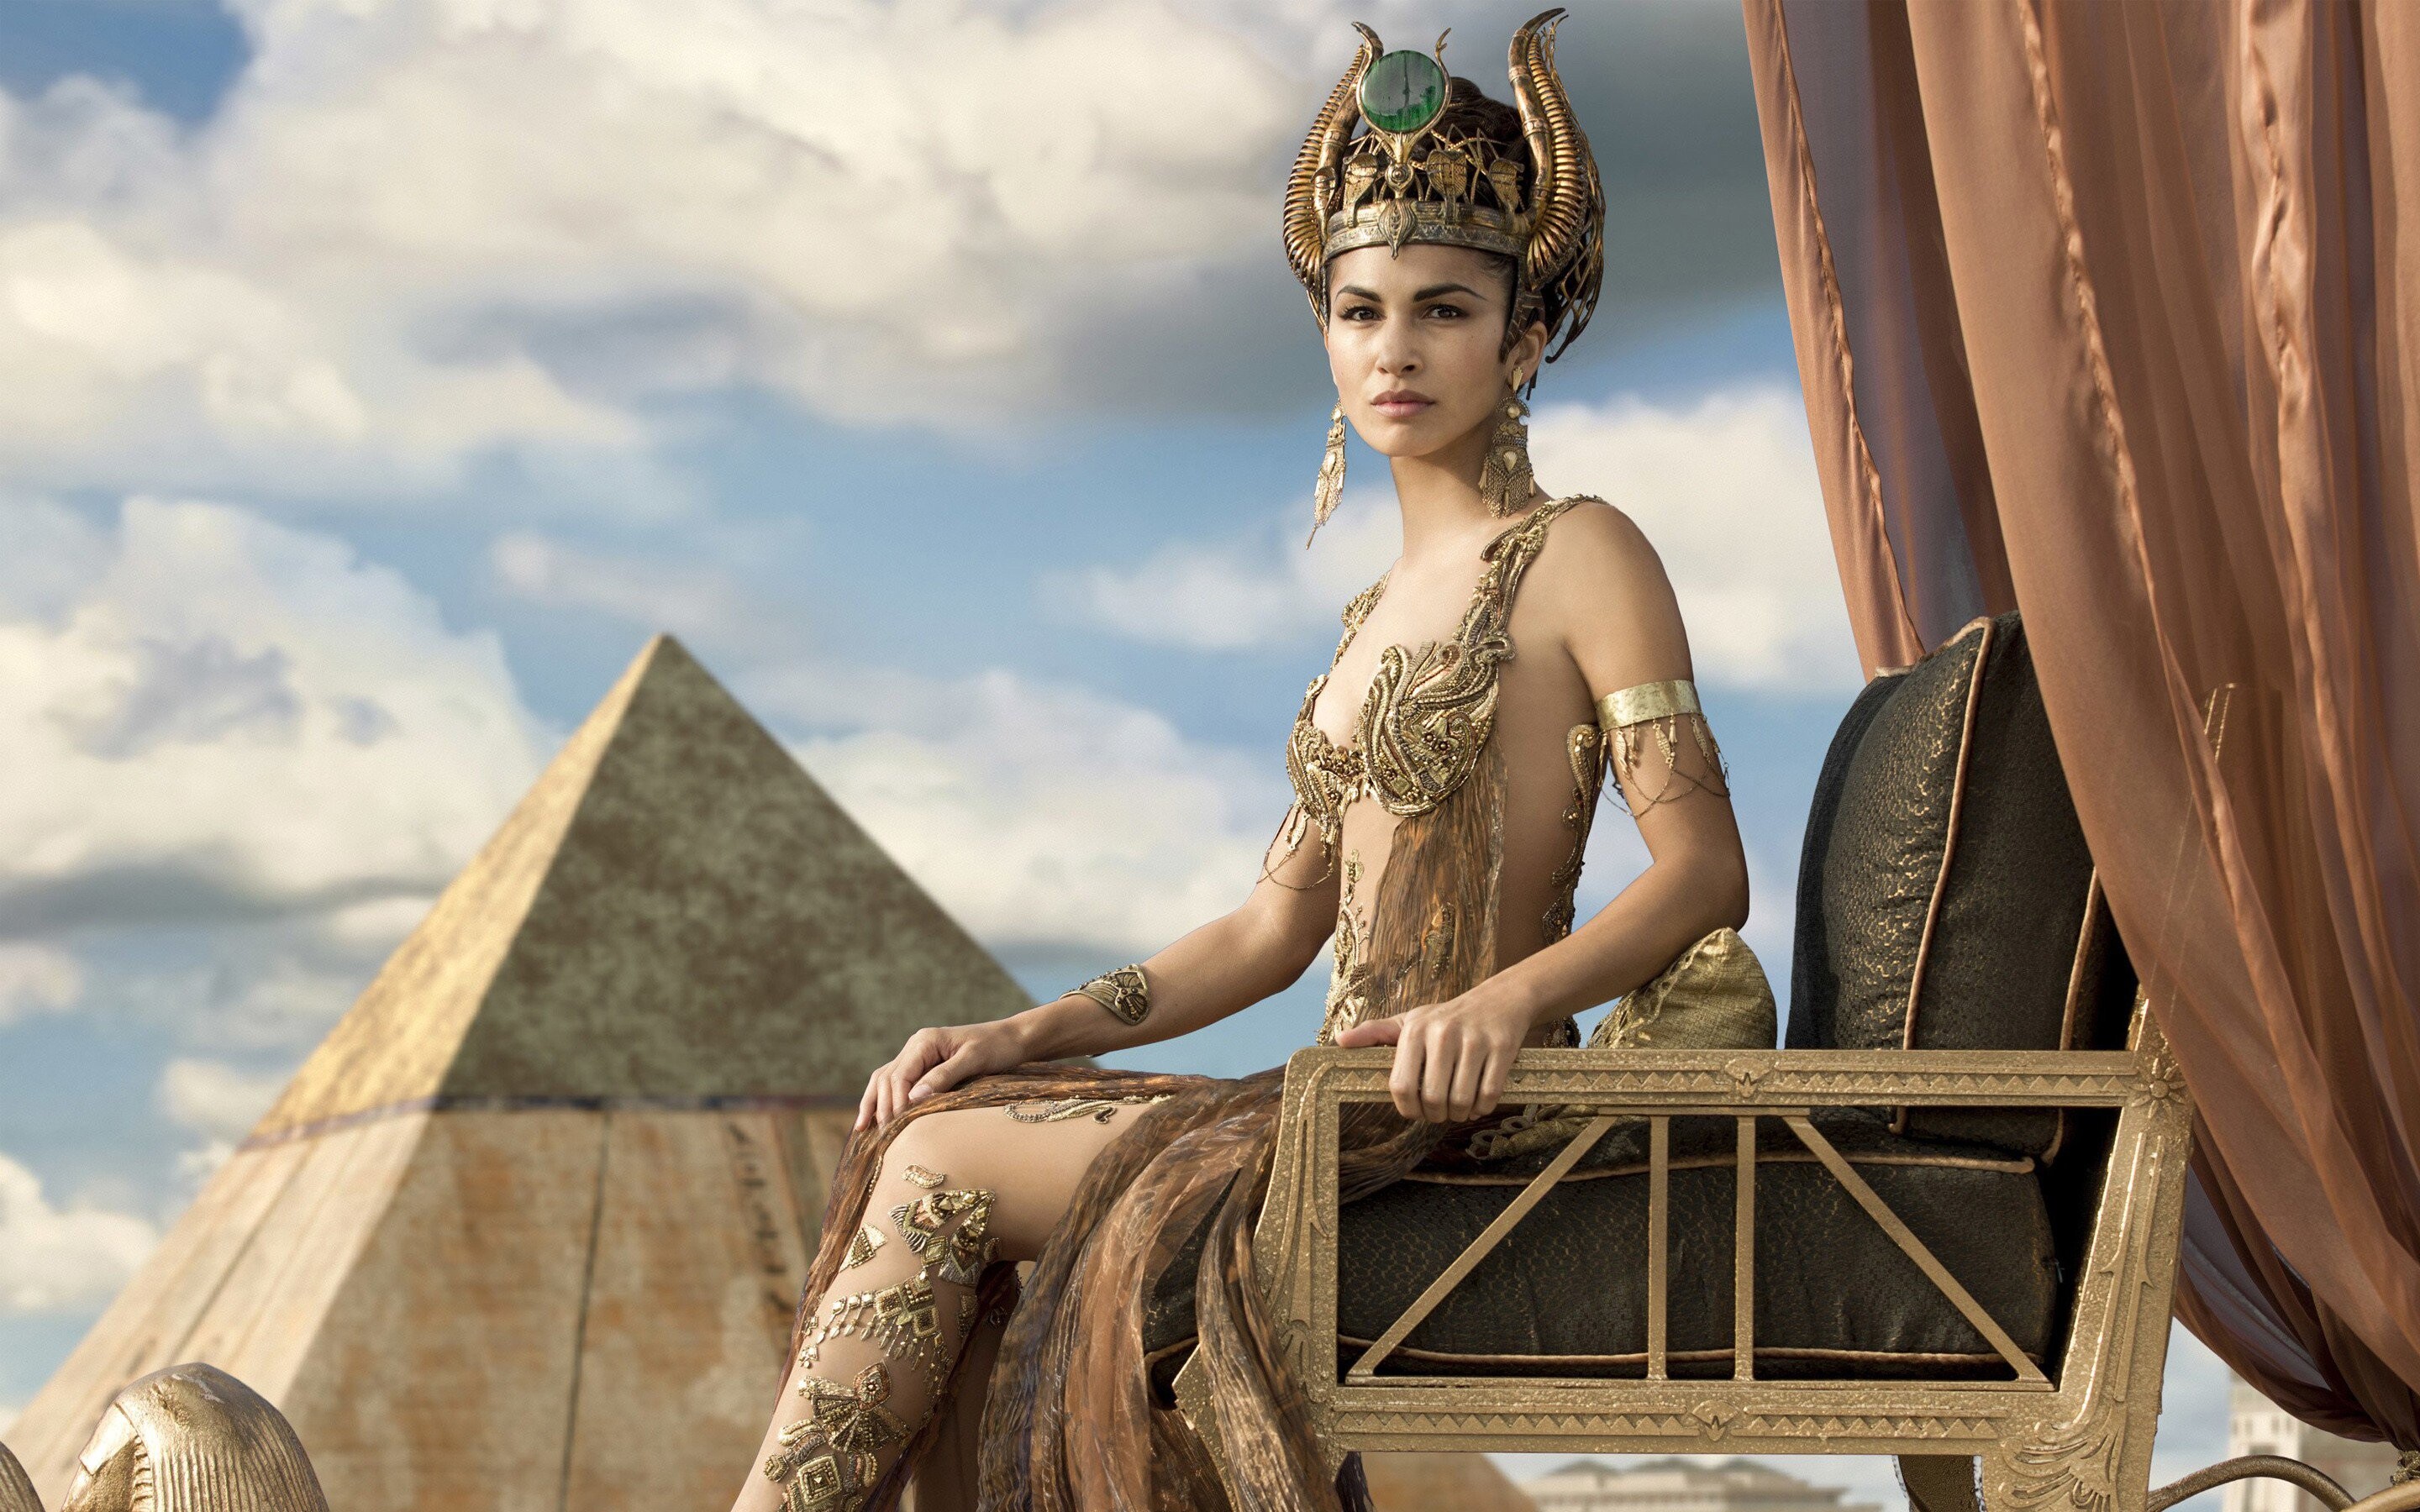 Gods of Egypt (Movie): Elodie Yung as Hathor, The deity of Love and Horus's lover, A fantasy adventure film. 2880x1800 HD Wallpaper.